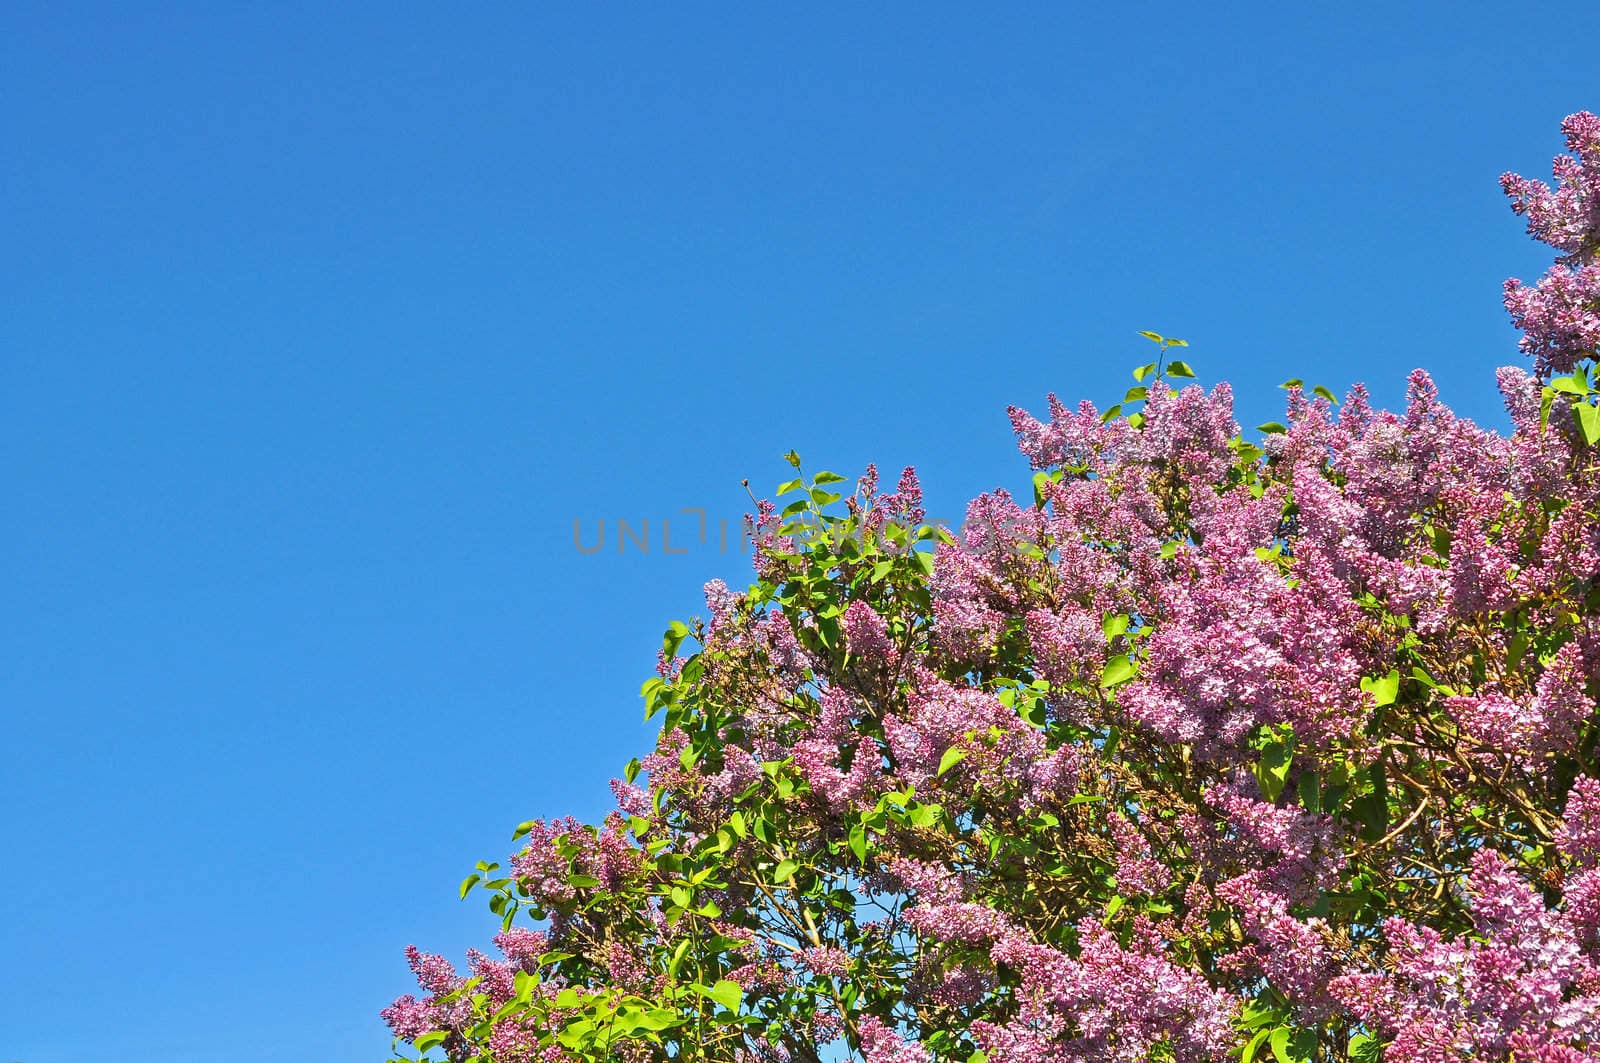 Pink lilac blossom and blue sky.